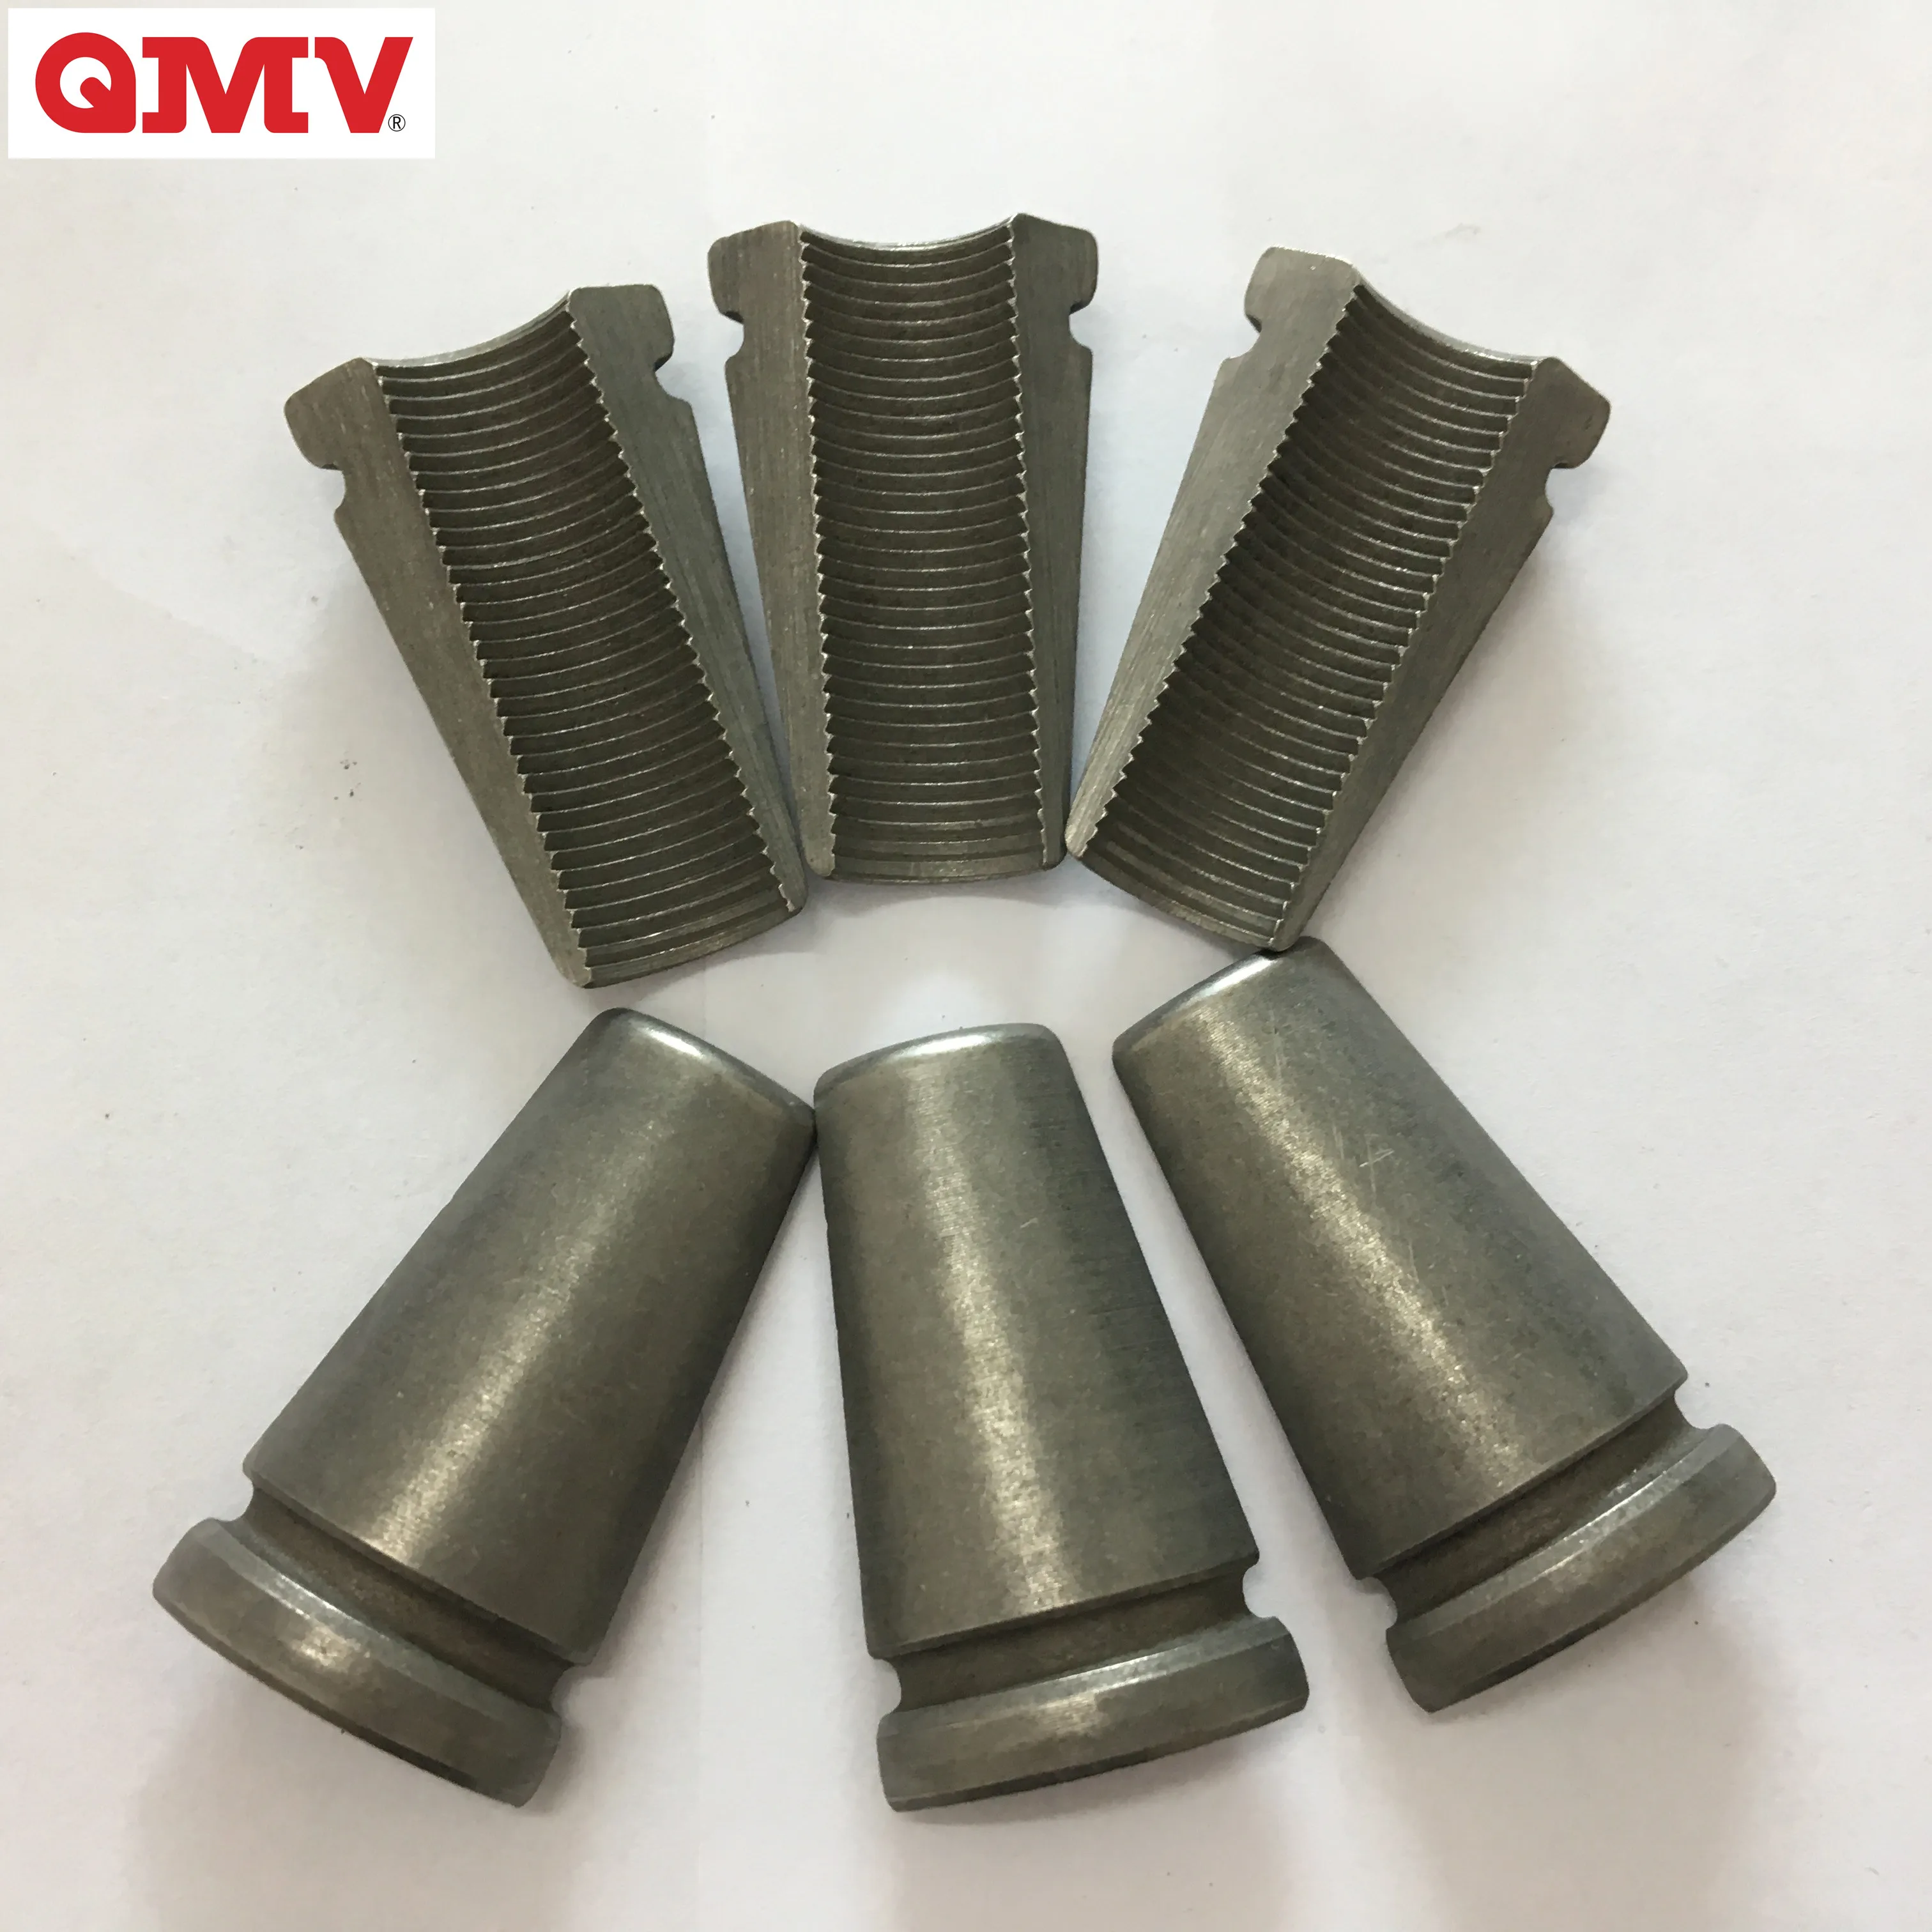 Prestress stainless steel prestressed anchor head and wedge